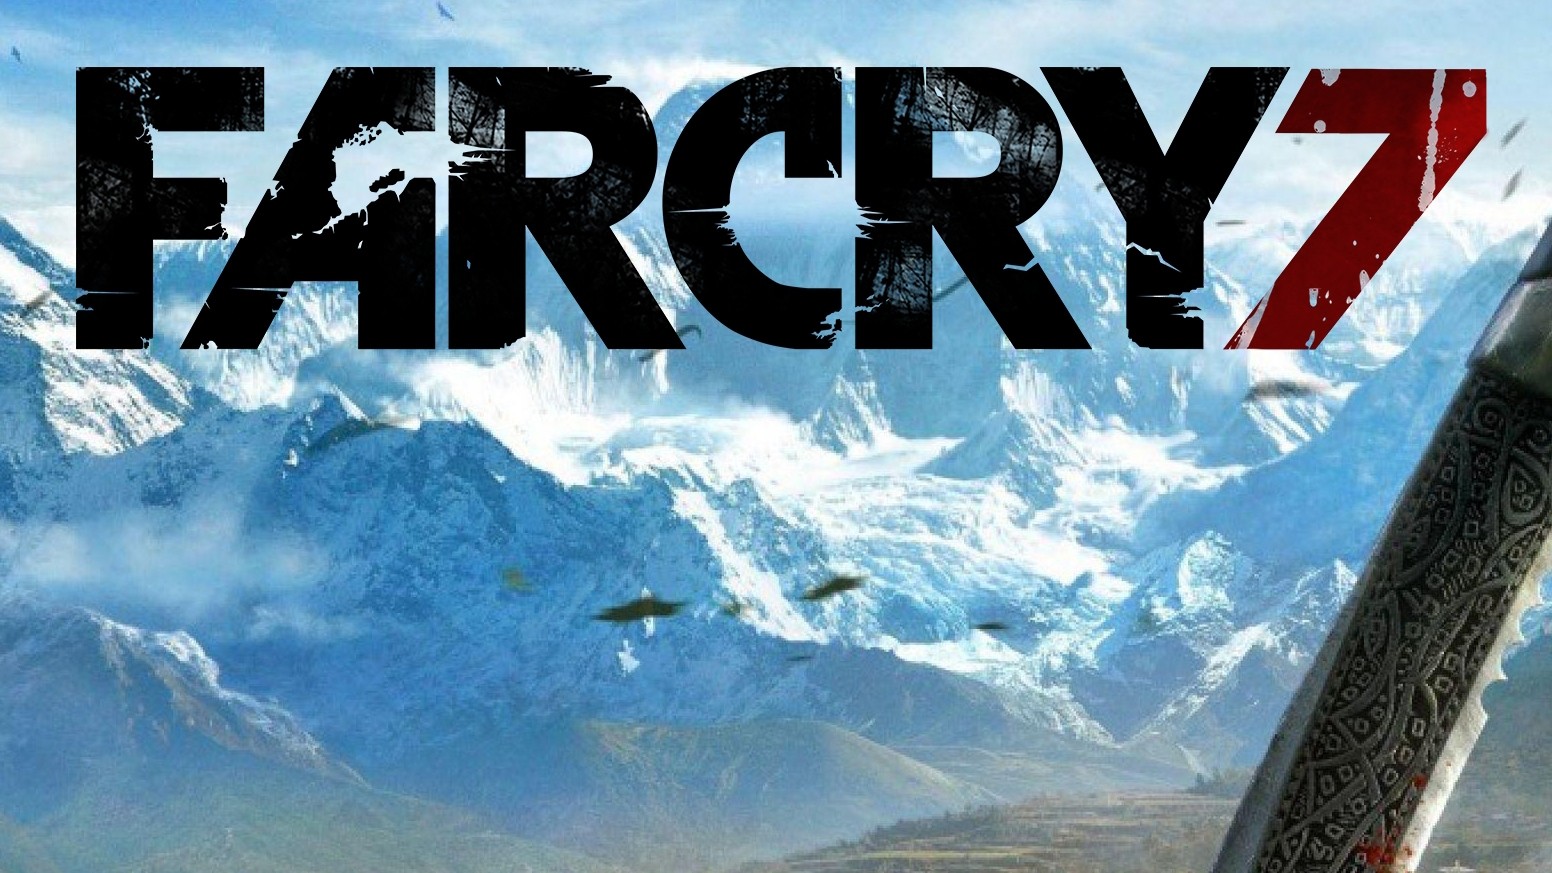 Ubisoft allegedly has two Far Cry titles in development, with 7 being the next.